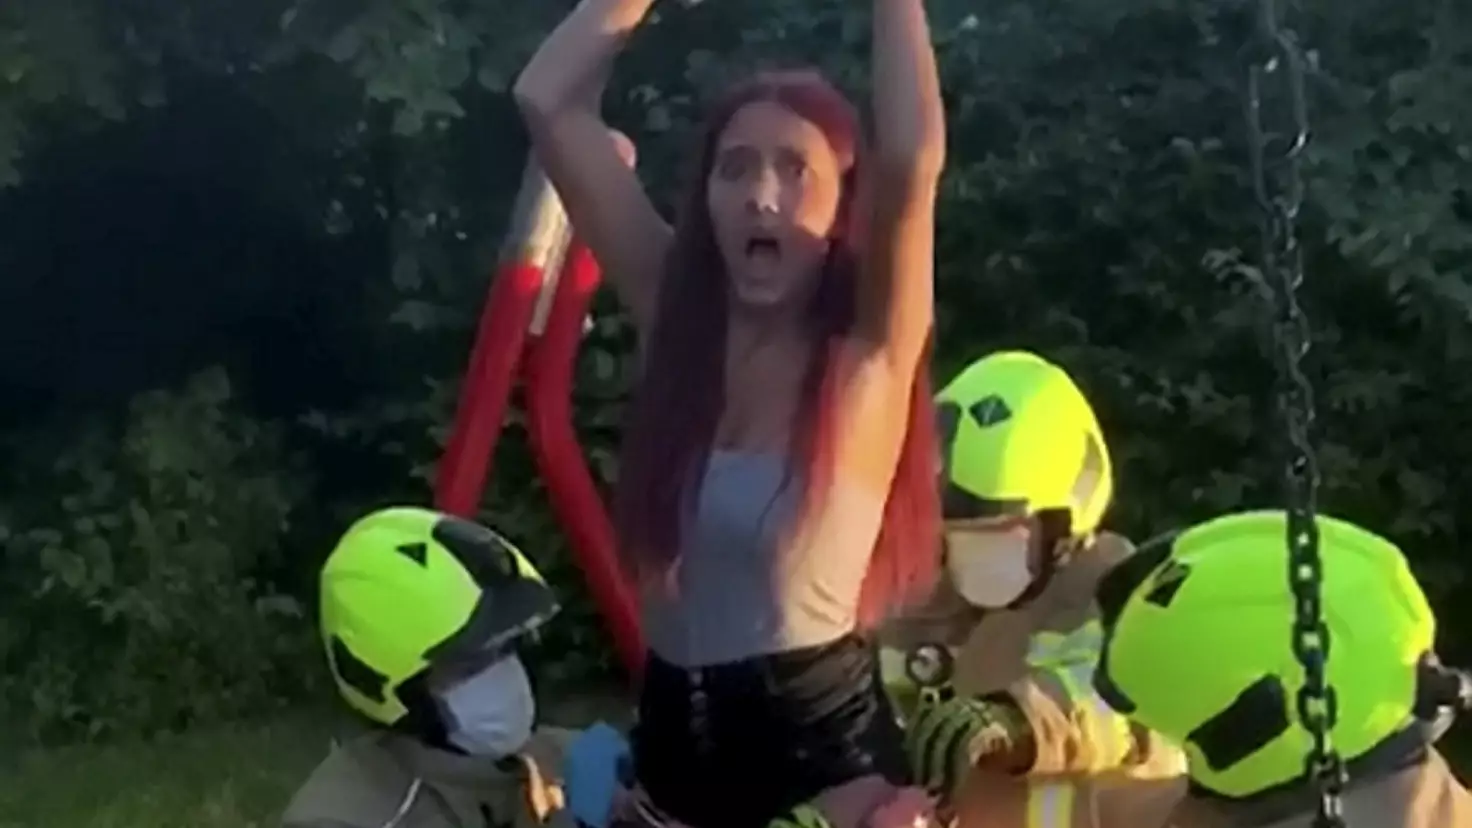 Firefighters Blast Online Craze Causing Teens To Become Trapped In Kids' Swings